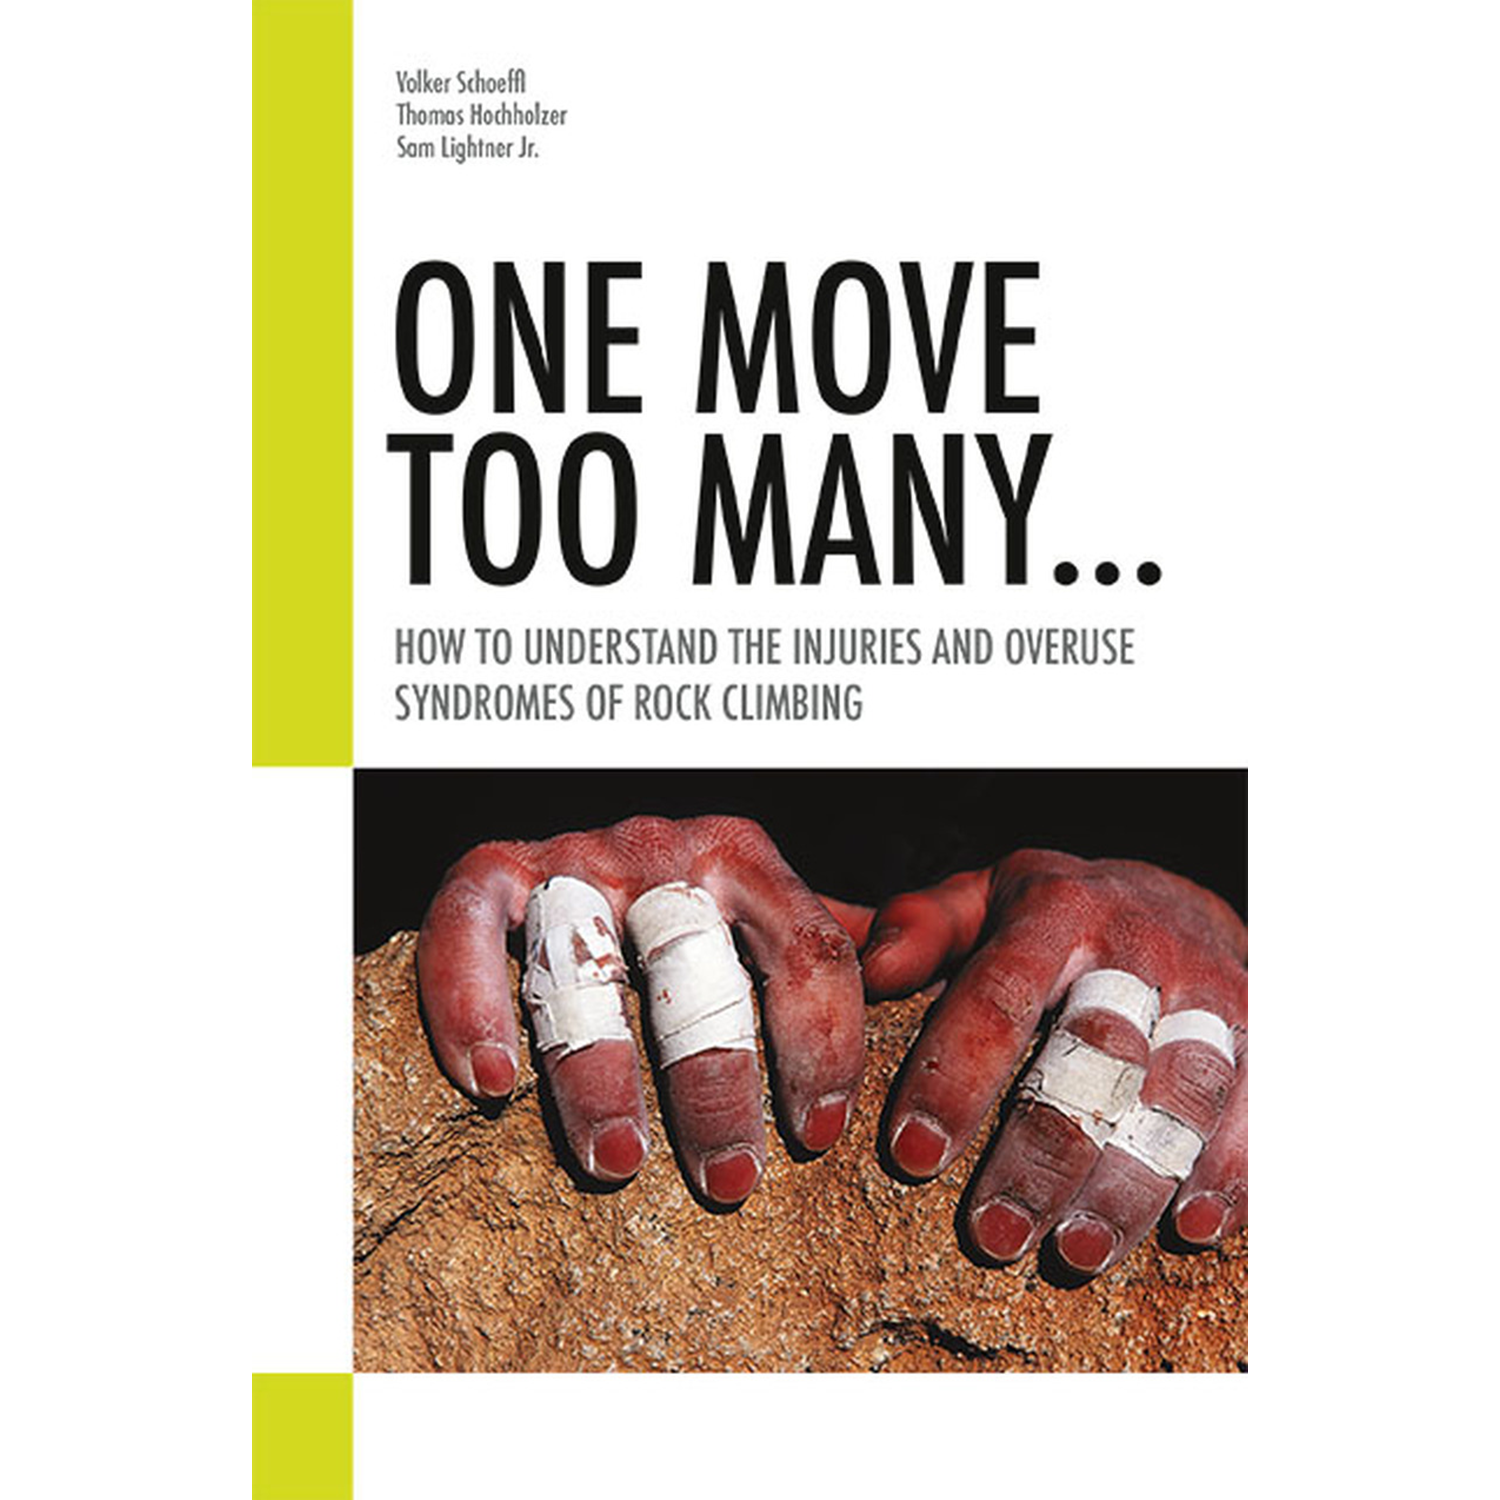 One Move Too Many: How to Understand the Injuries and Overuse Syndromes of Rock Climbing